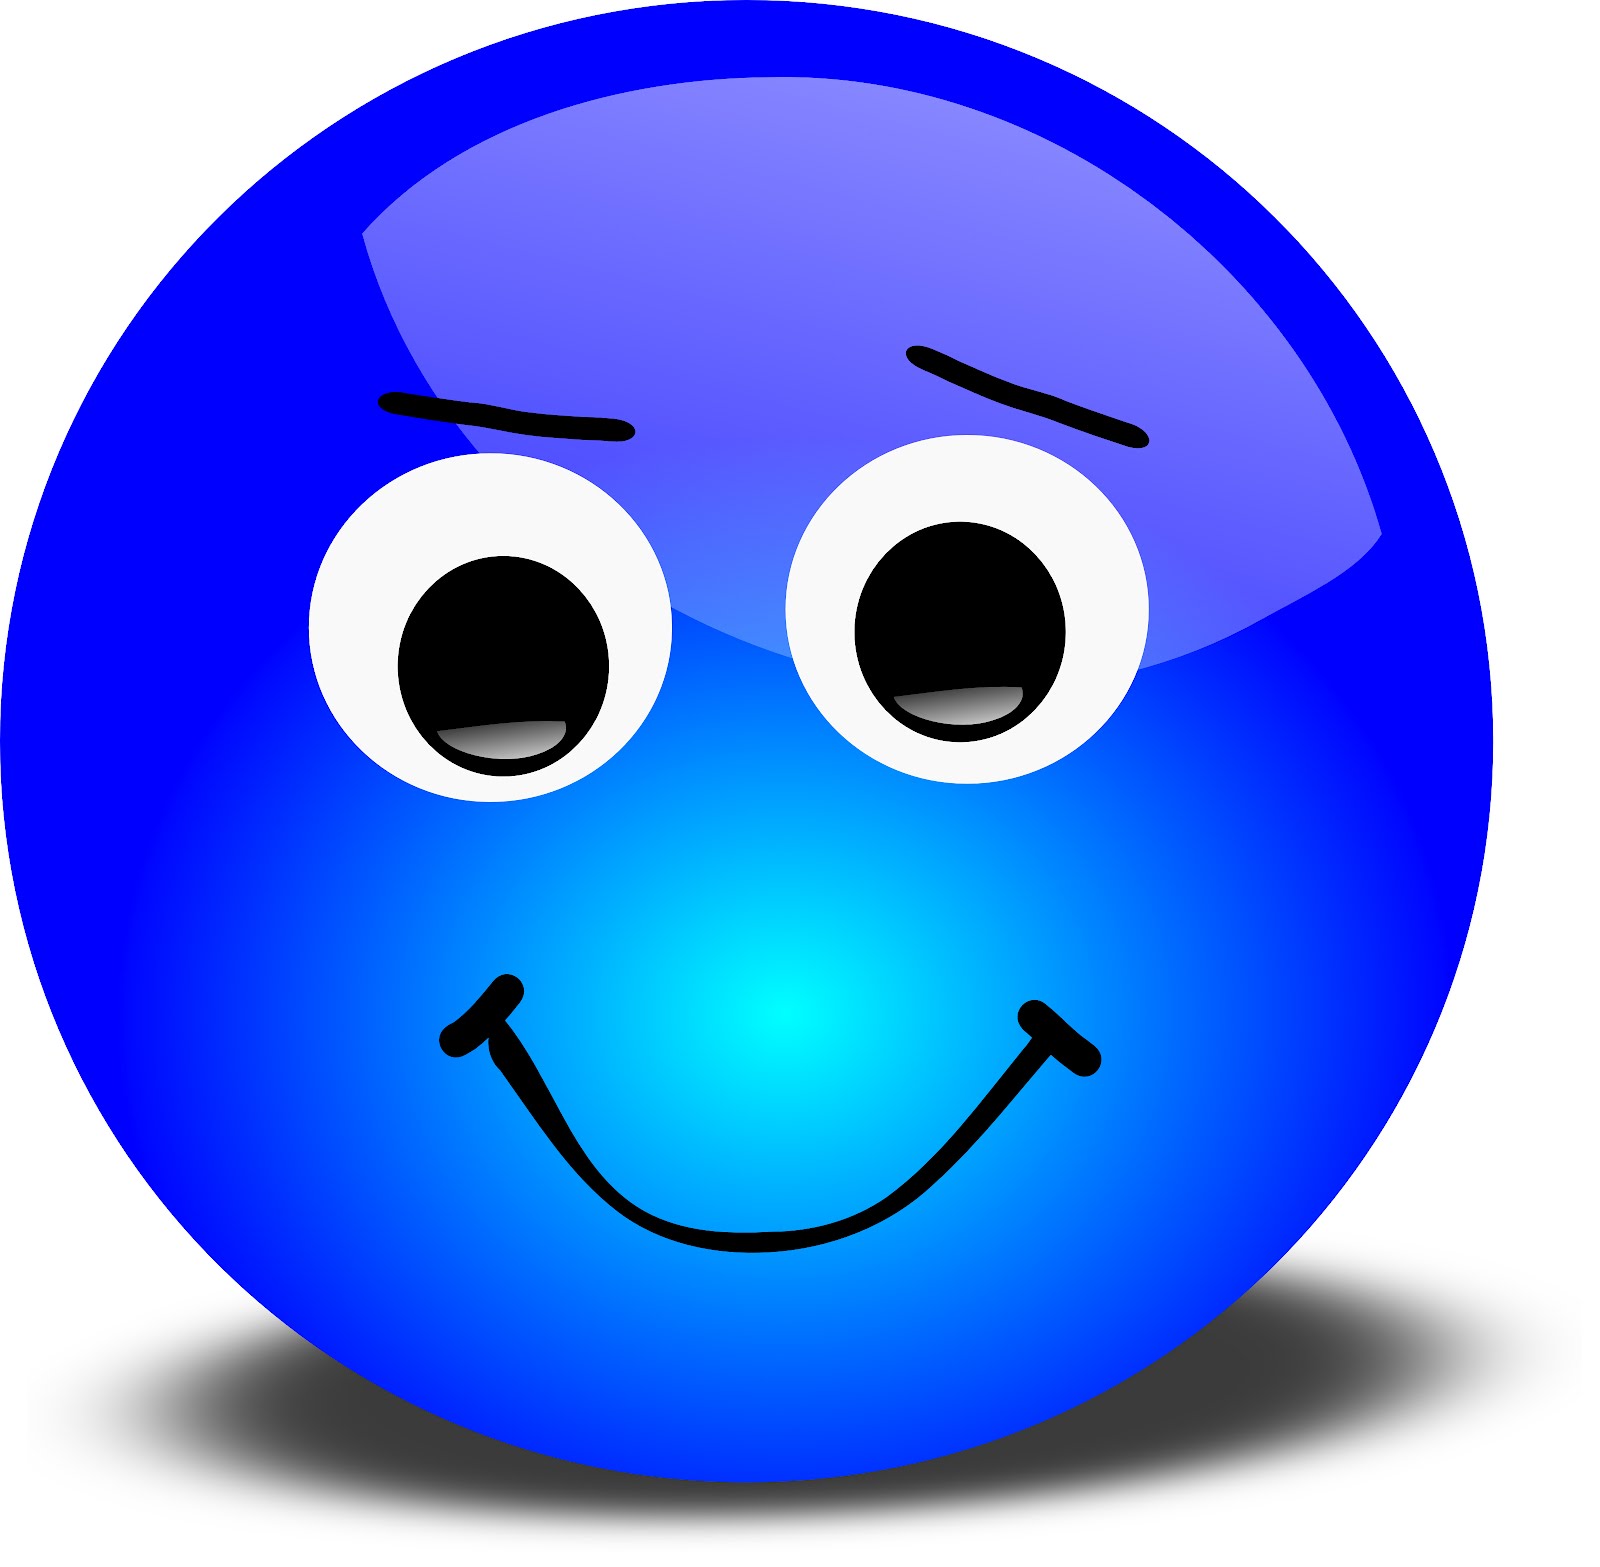 20 Simple Smiley Face Clip Art Free Cliparts That You Can Download To